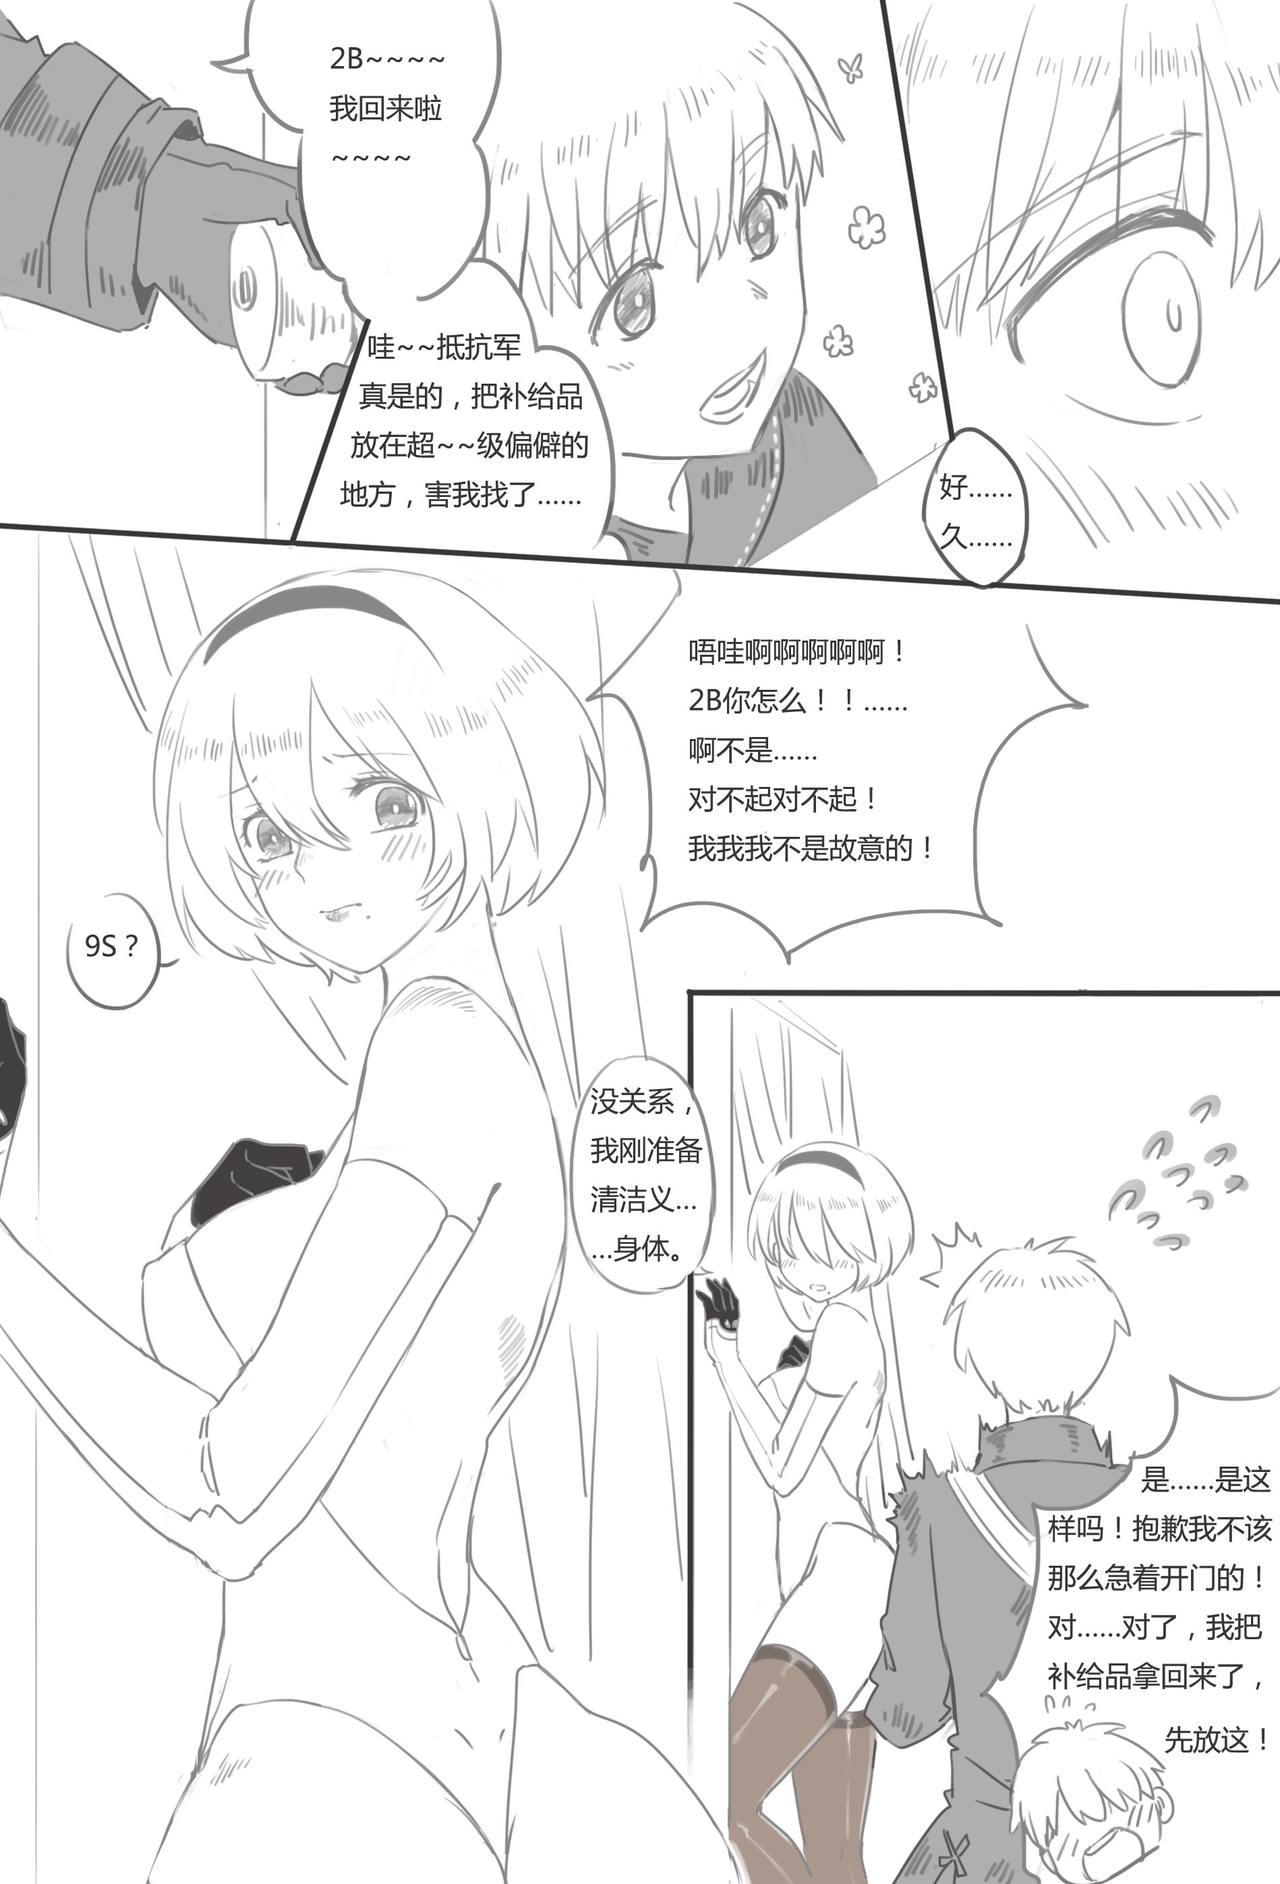 Comendo [WS] 9Sx2B - Life after the [E] end. (NieR:Automata) [Chinese] - Nier automata Gay Shorthair - Page 3